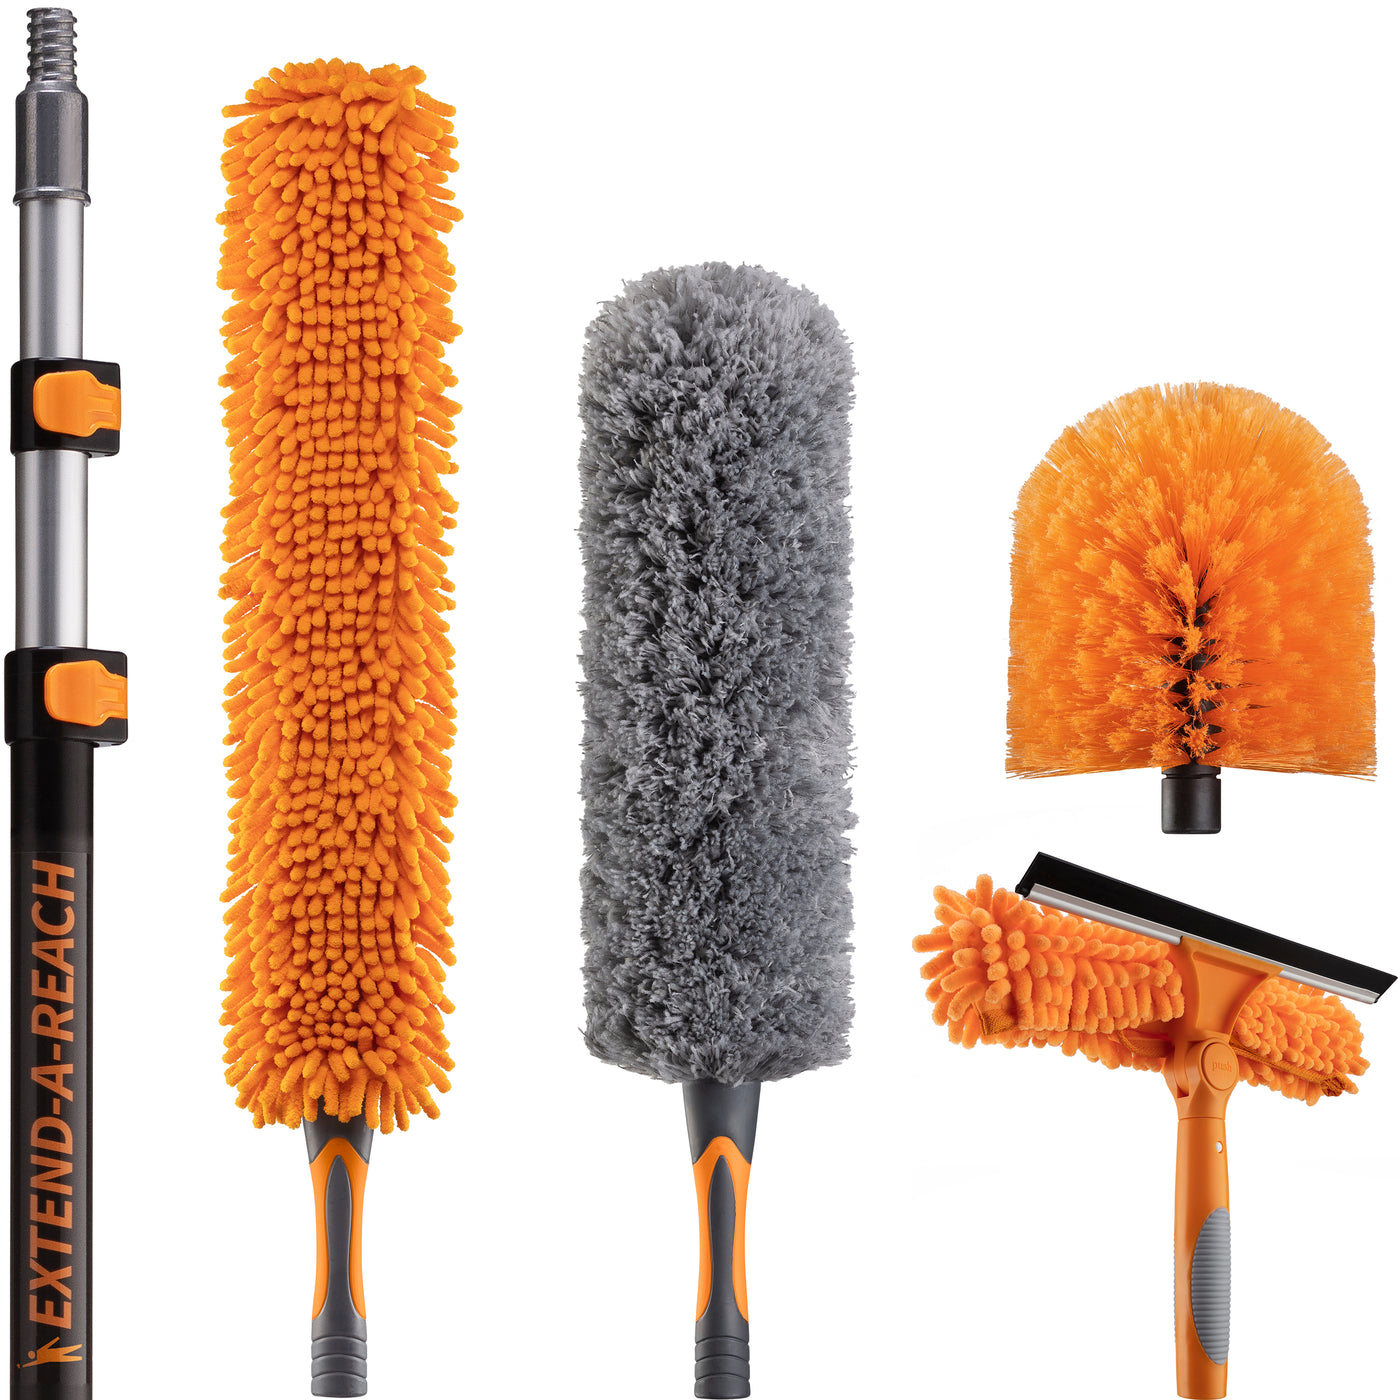 Dusting and Cleaning kit with extension pole